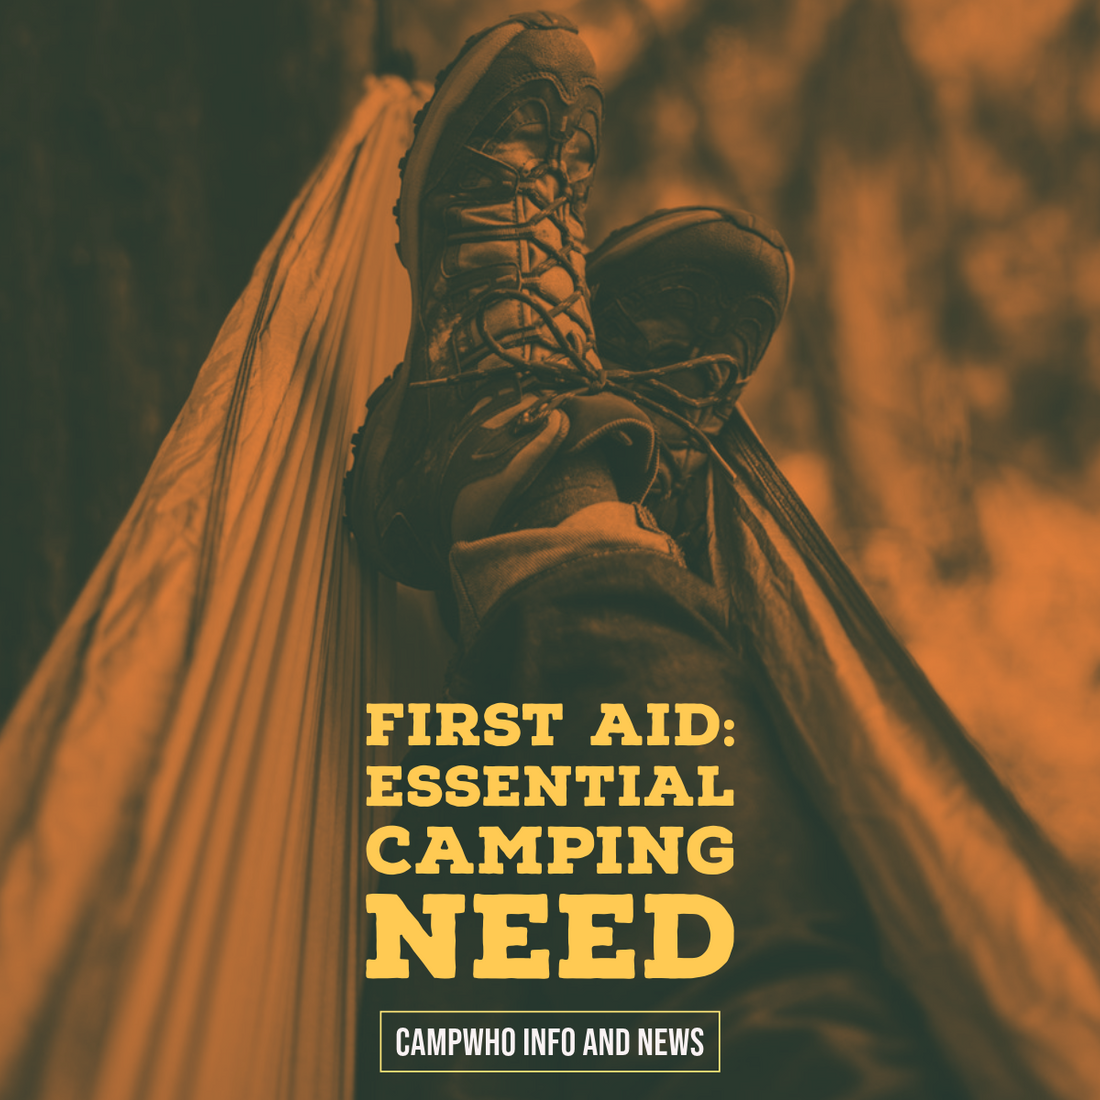 First aid: Essential Camping need